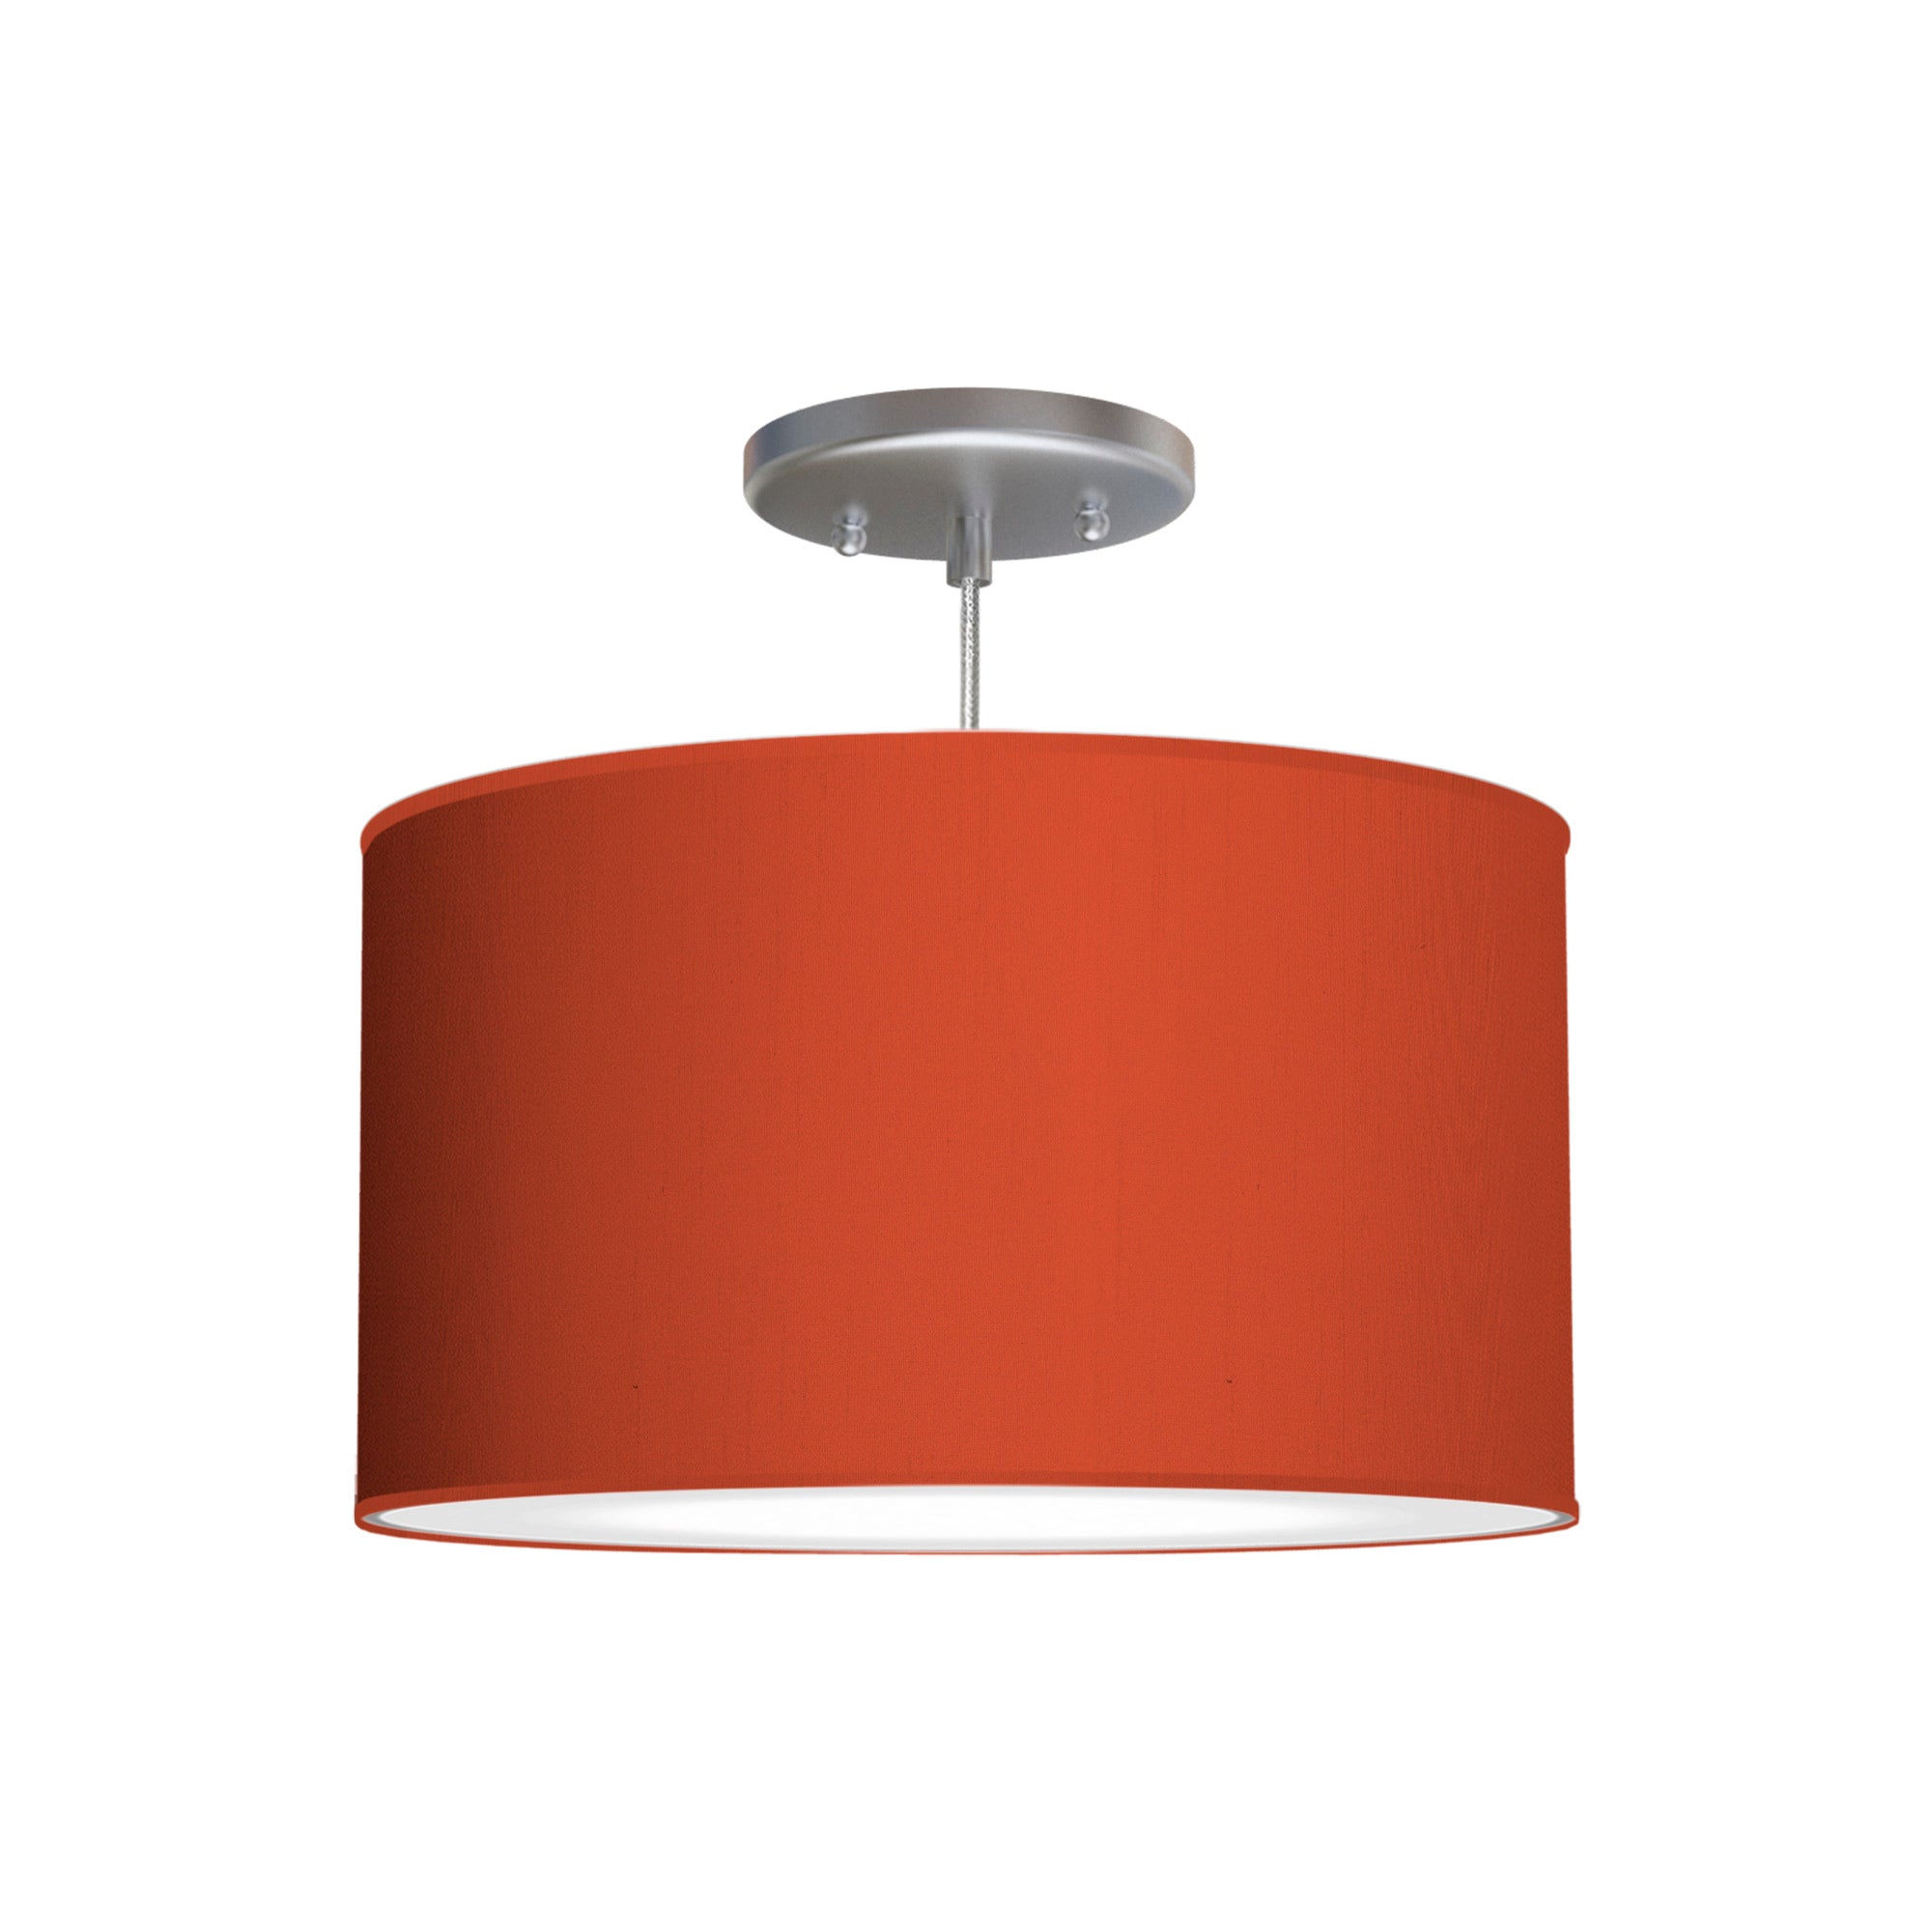 The Gab Hanging Lamp from Seascape Fixtures with a silk shade in red color.